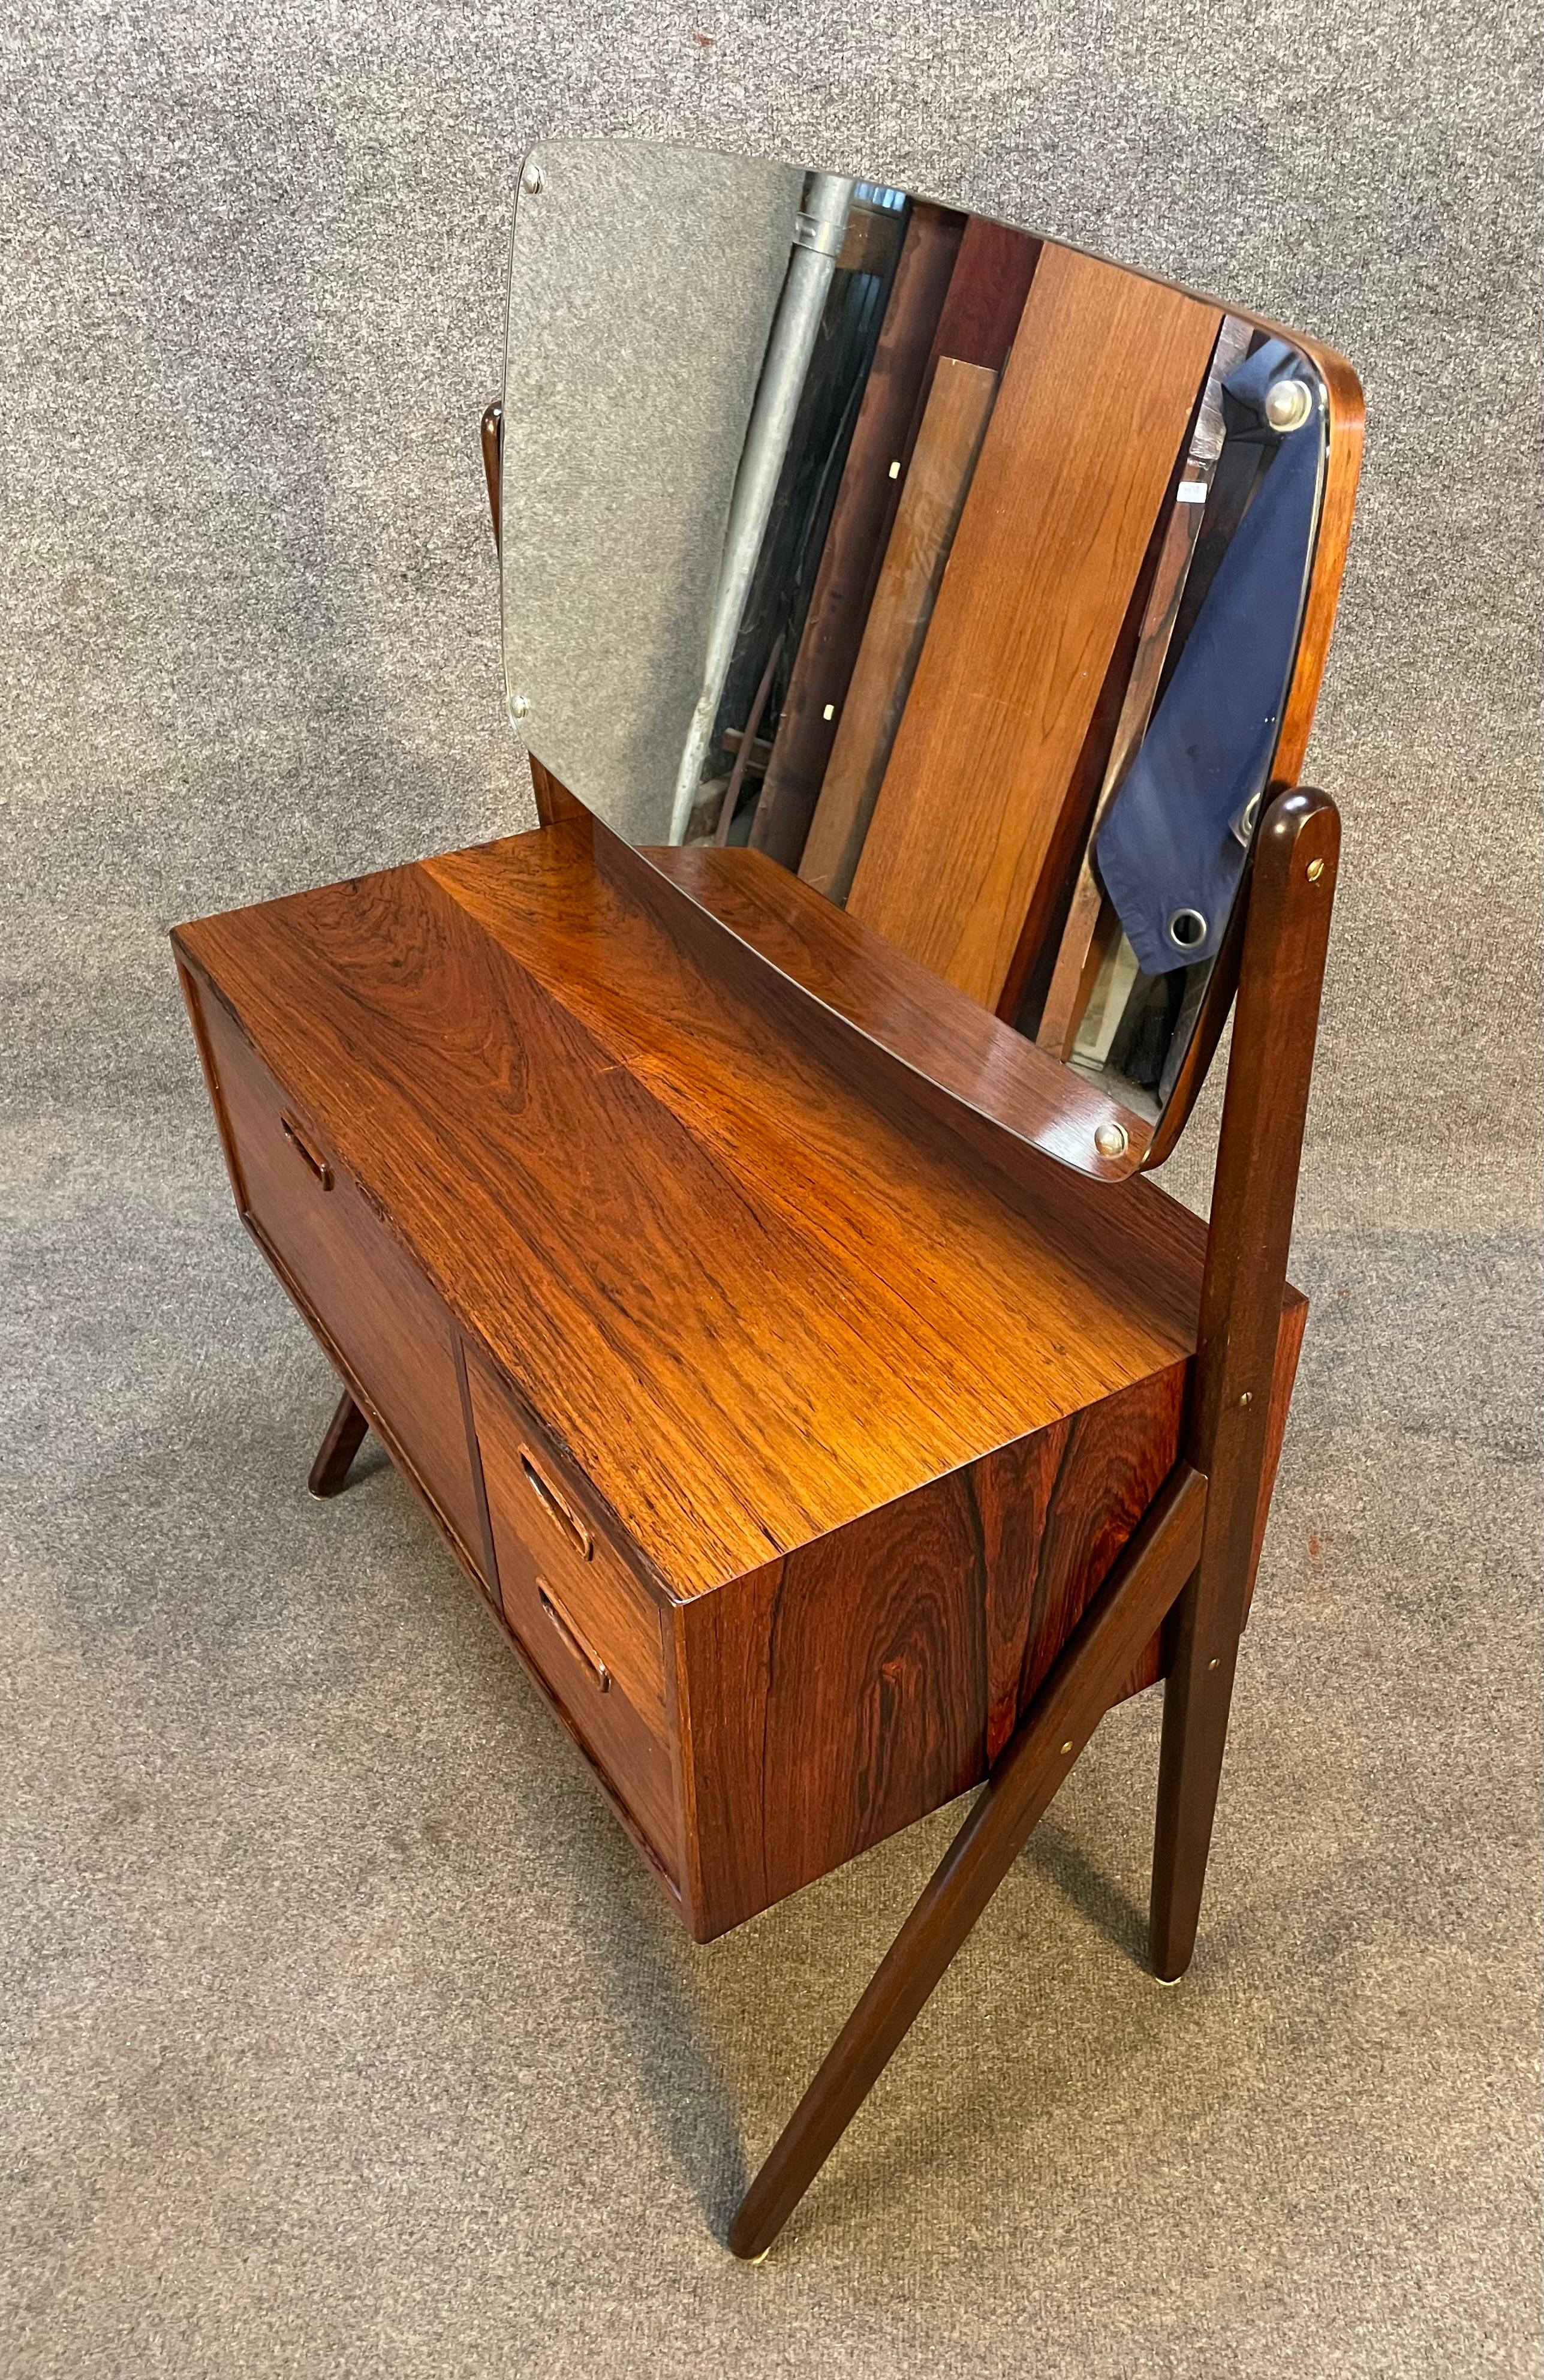 Vintage Danish Mid-Century Modern Rosewood Vanity by Sigfred Omann In Good Condition For Sale In San Marcos, CA